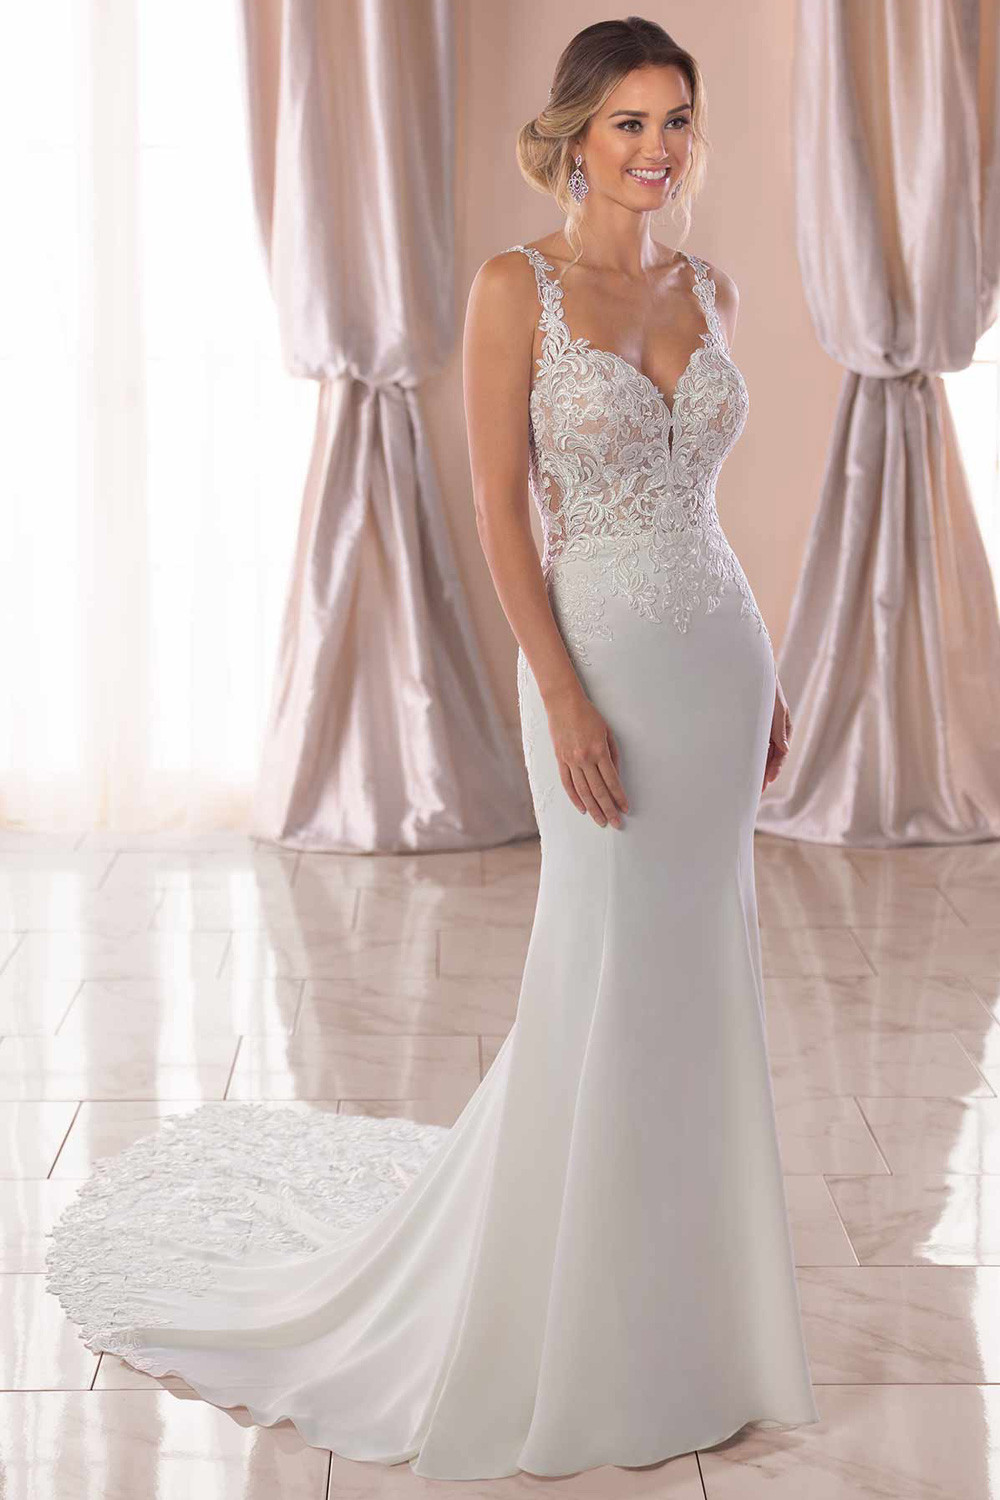 Sexy Dresses To Wear To A Wedding
 Stella York 6834 y wedding dress with sheer open back